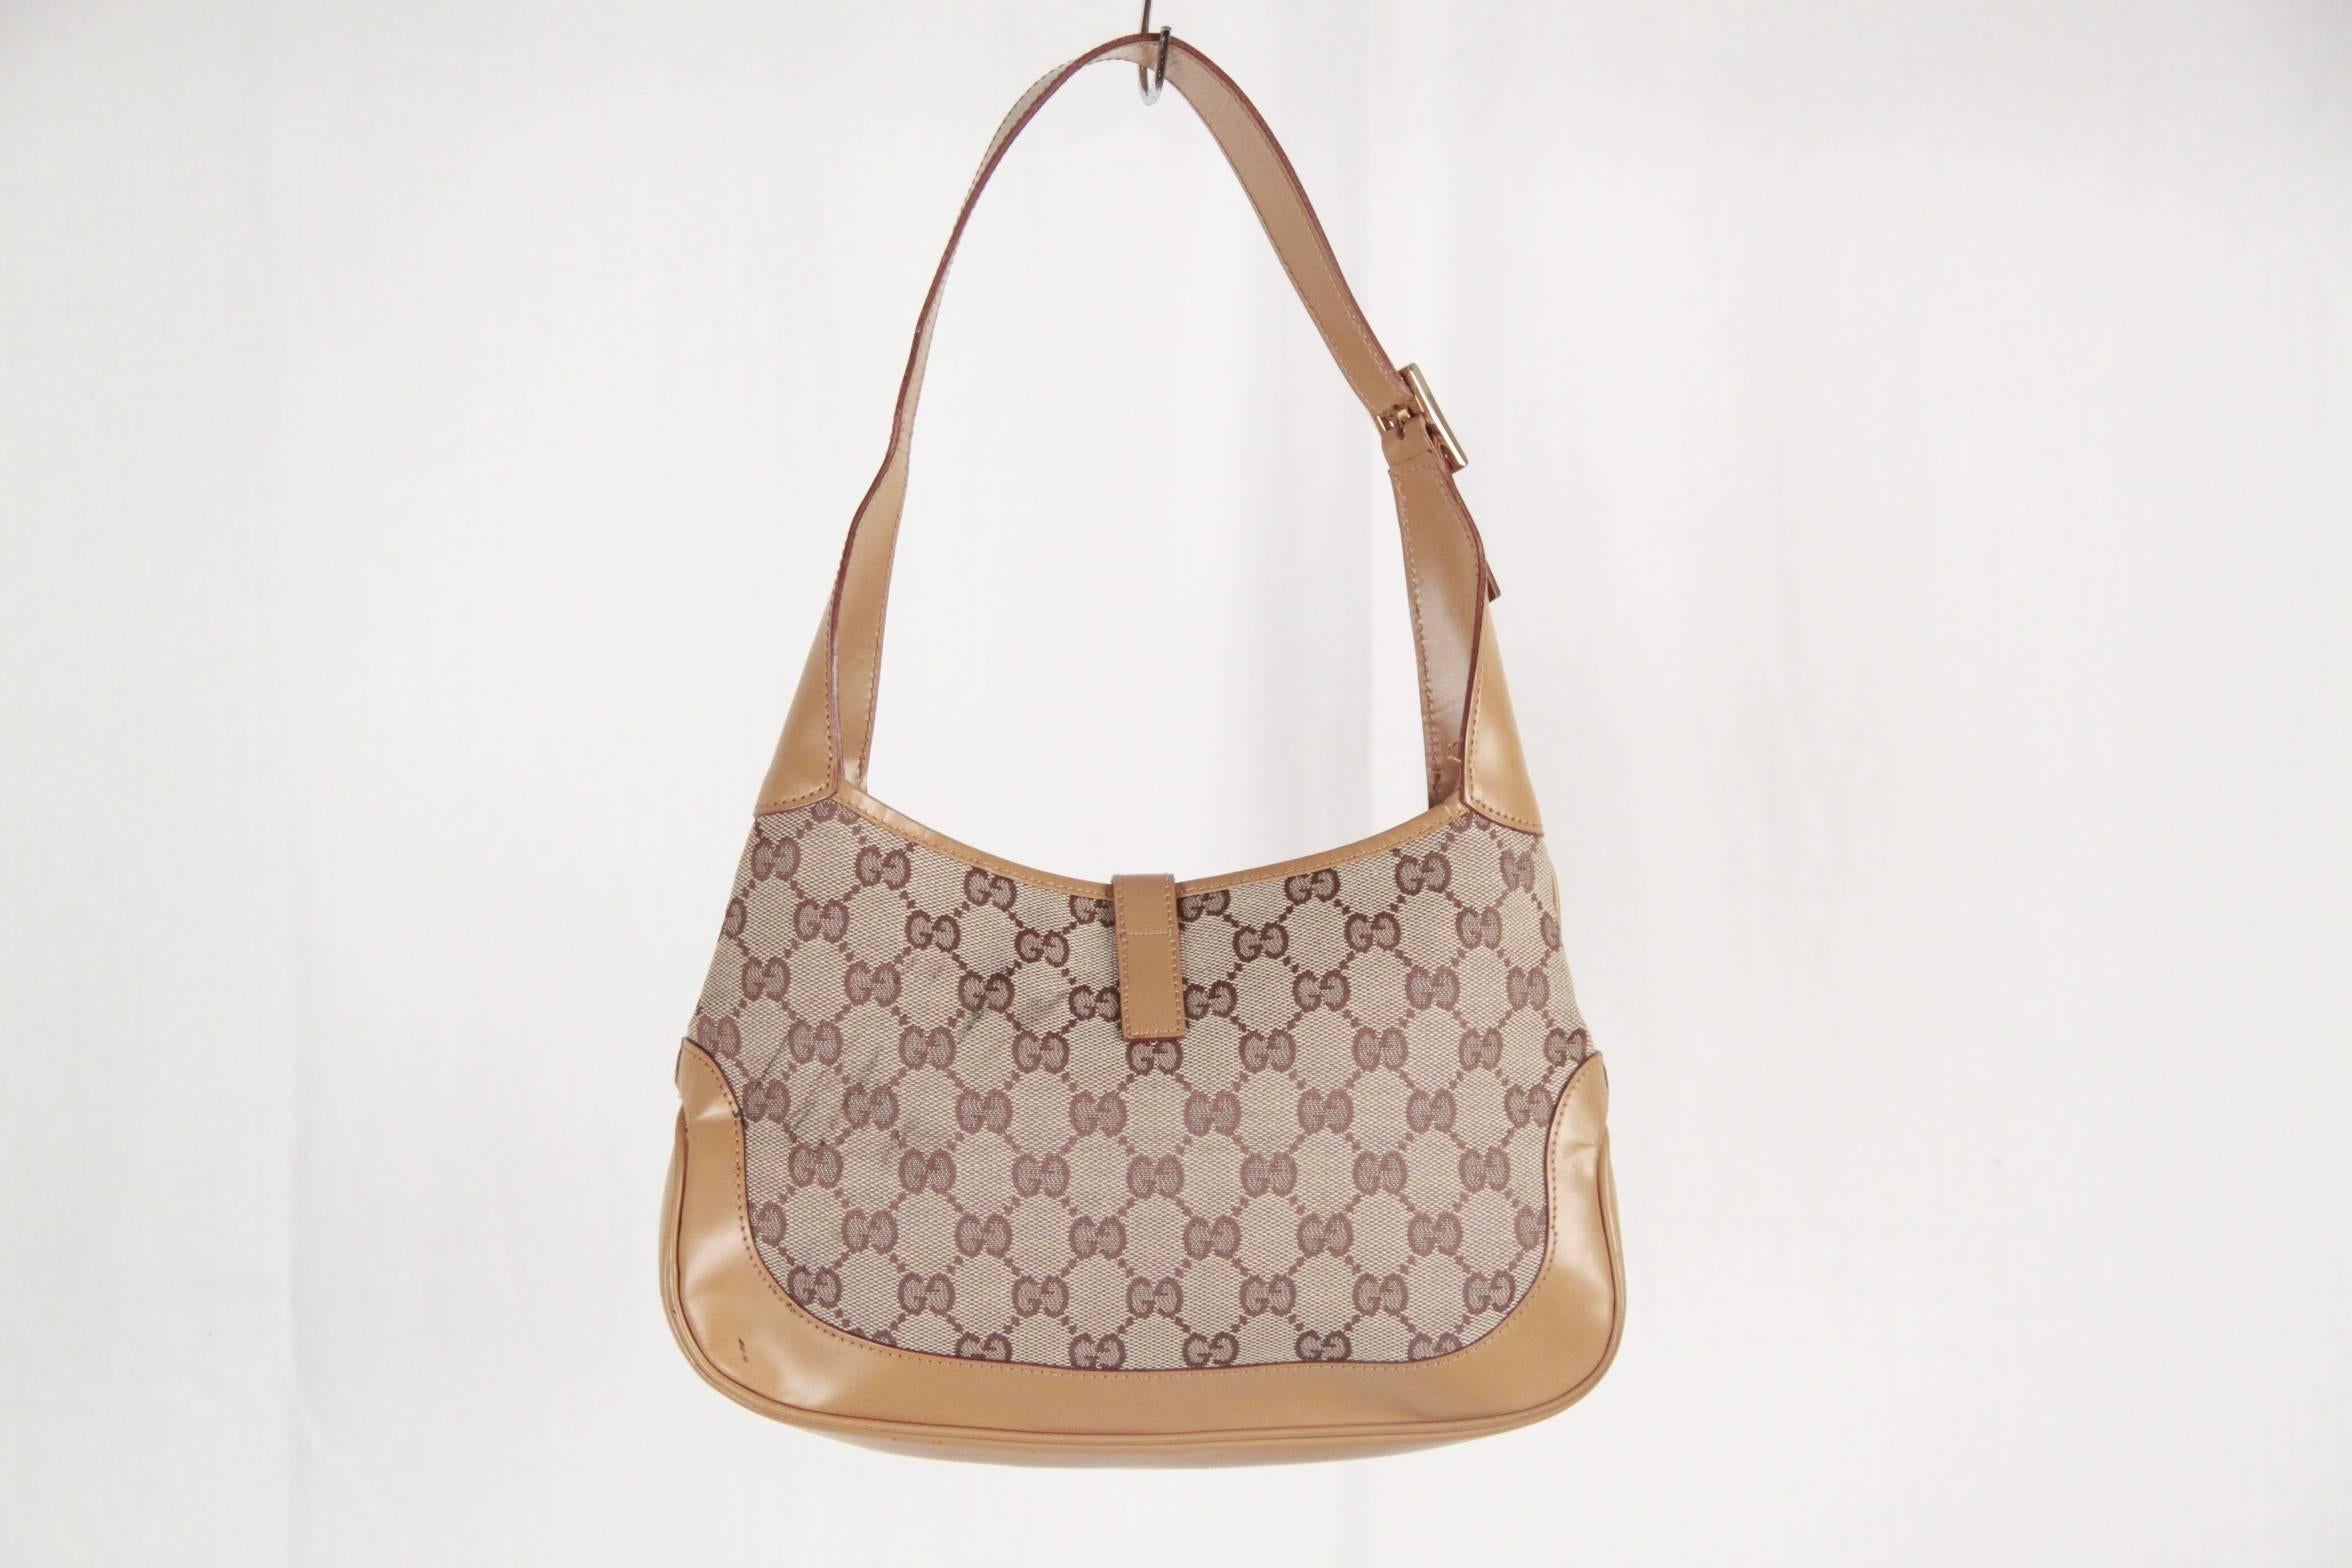 Classic and stylish is this Gucci Jackie O Hobo pefect for any occasion. Beige monogram canvas with tan leather trim and strap. The strap it is also embellished with silver toned metal hardware. The single strap is adorned with a silver buckle on